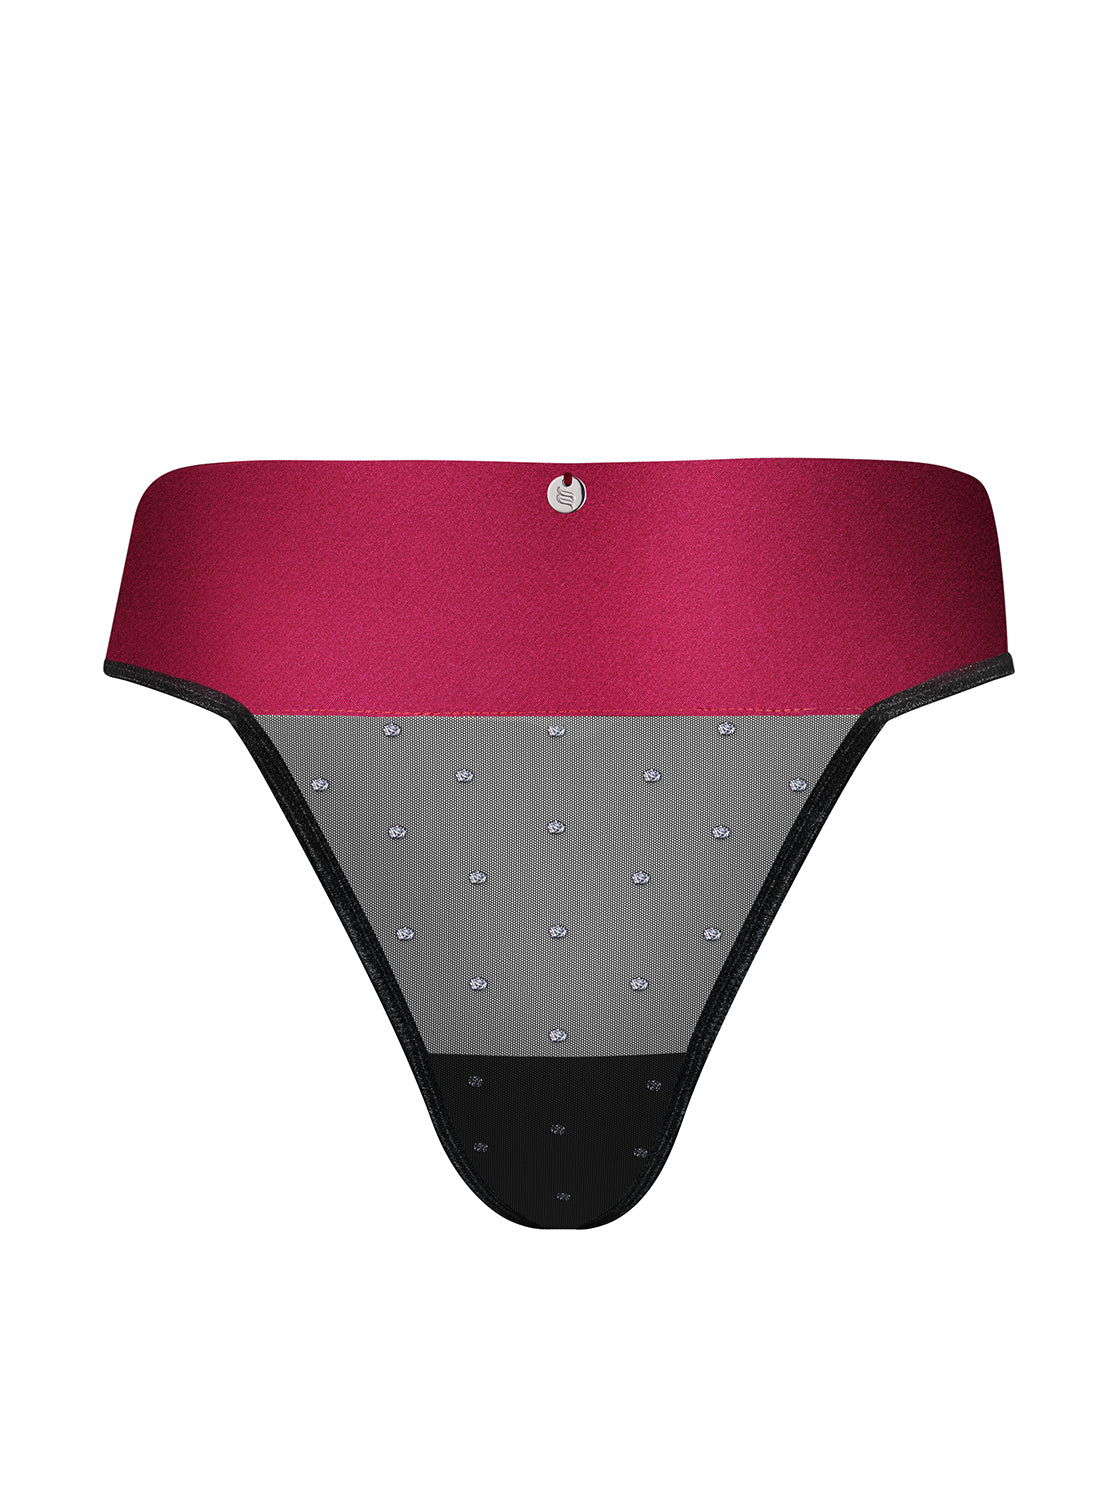 Tienesy unique thong made of translucent material in black with glittering dots